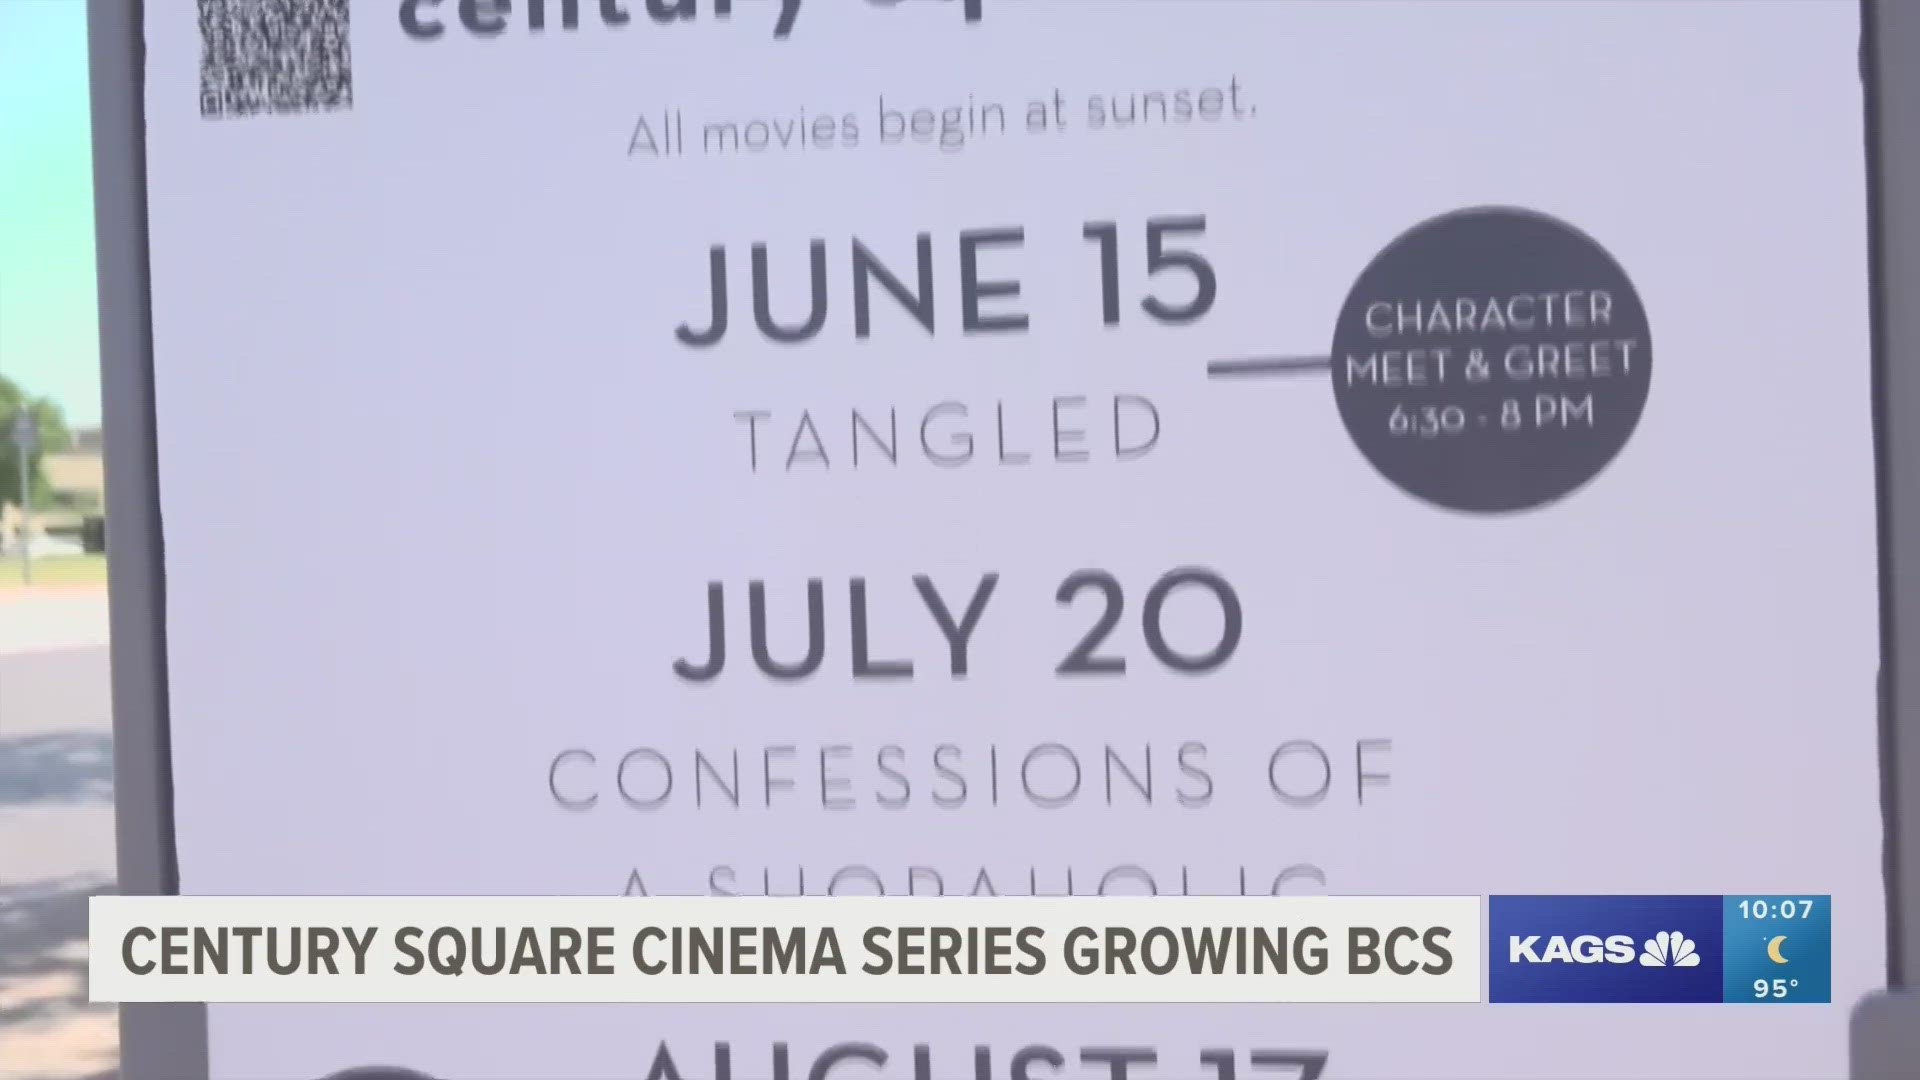 On June 20, Century Square will show their second matinee as part of their Century Square Cinema summer series.